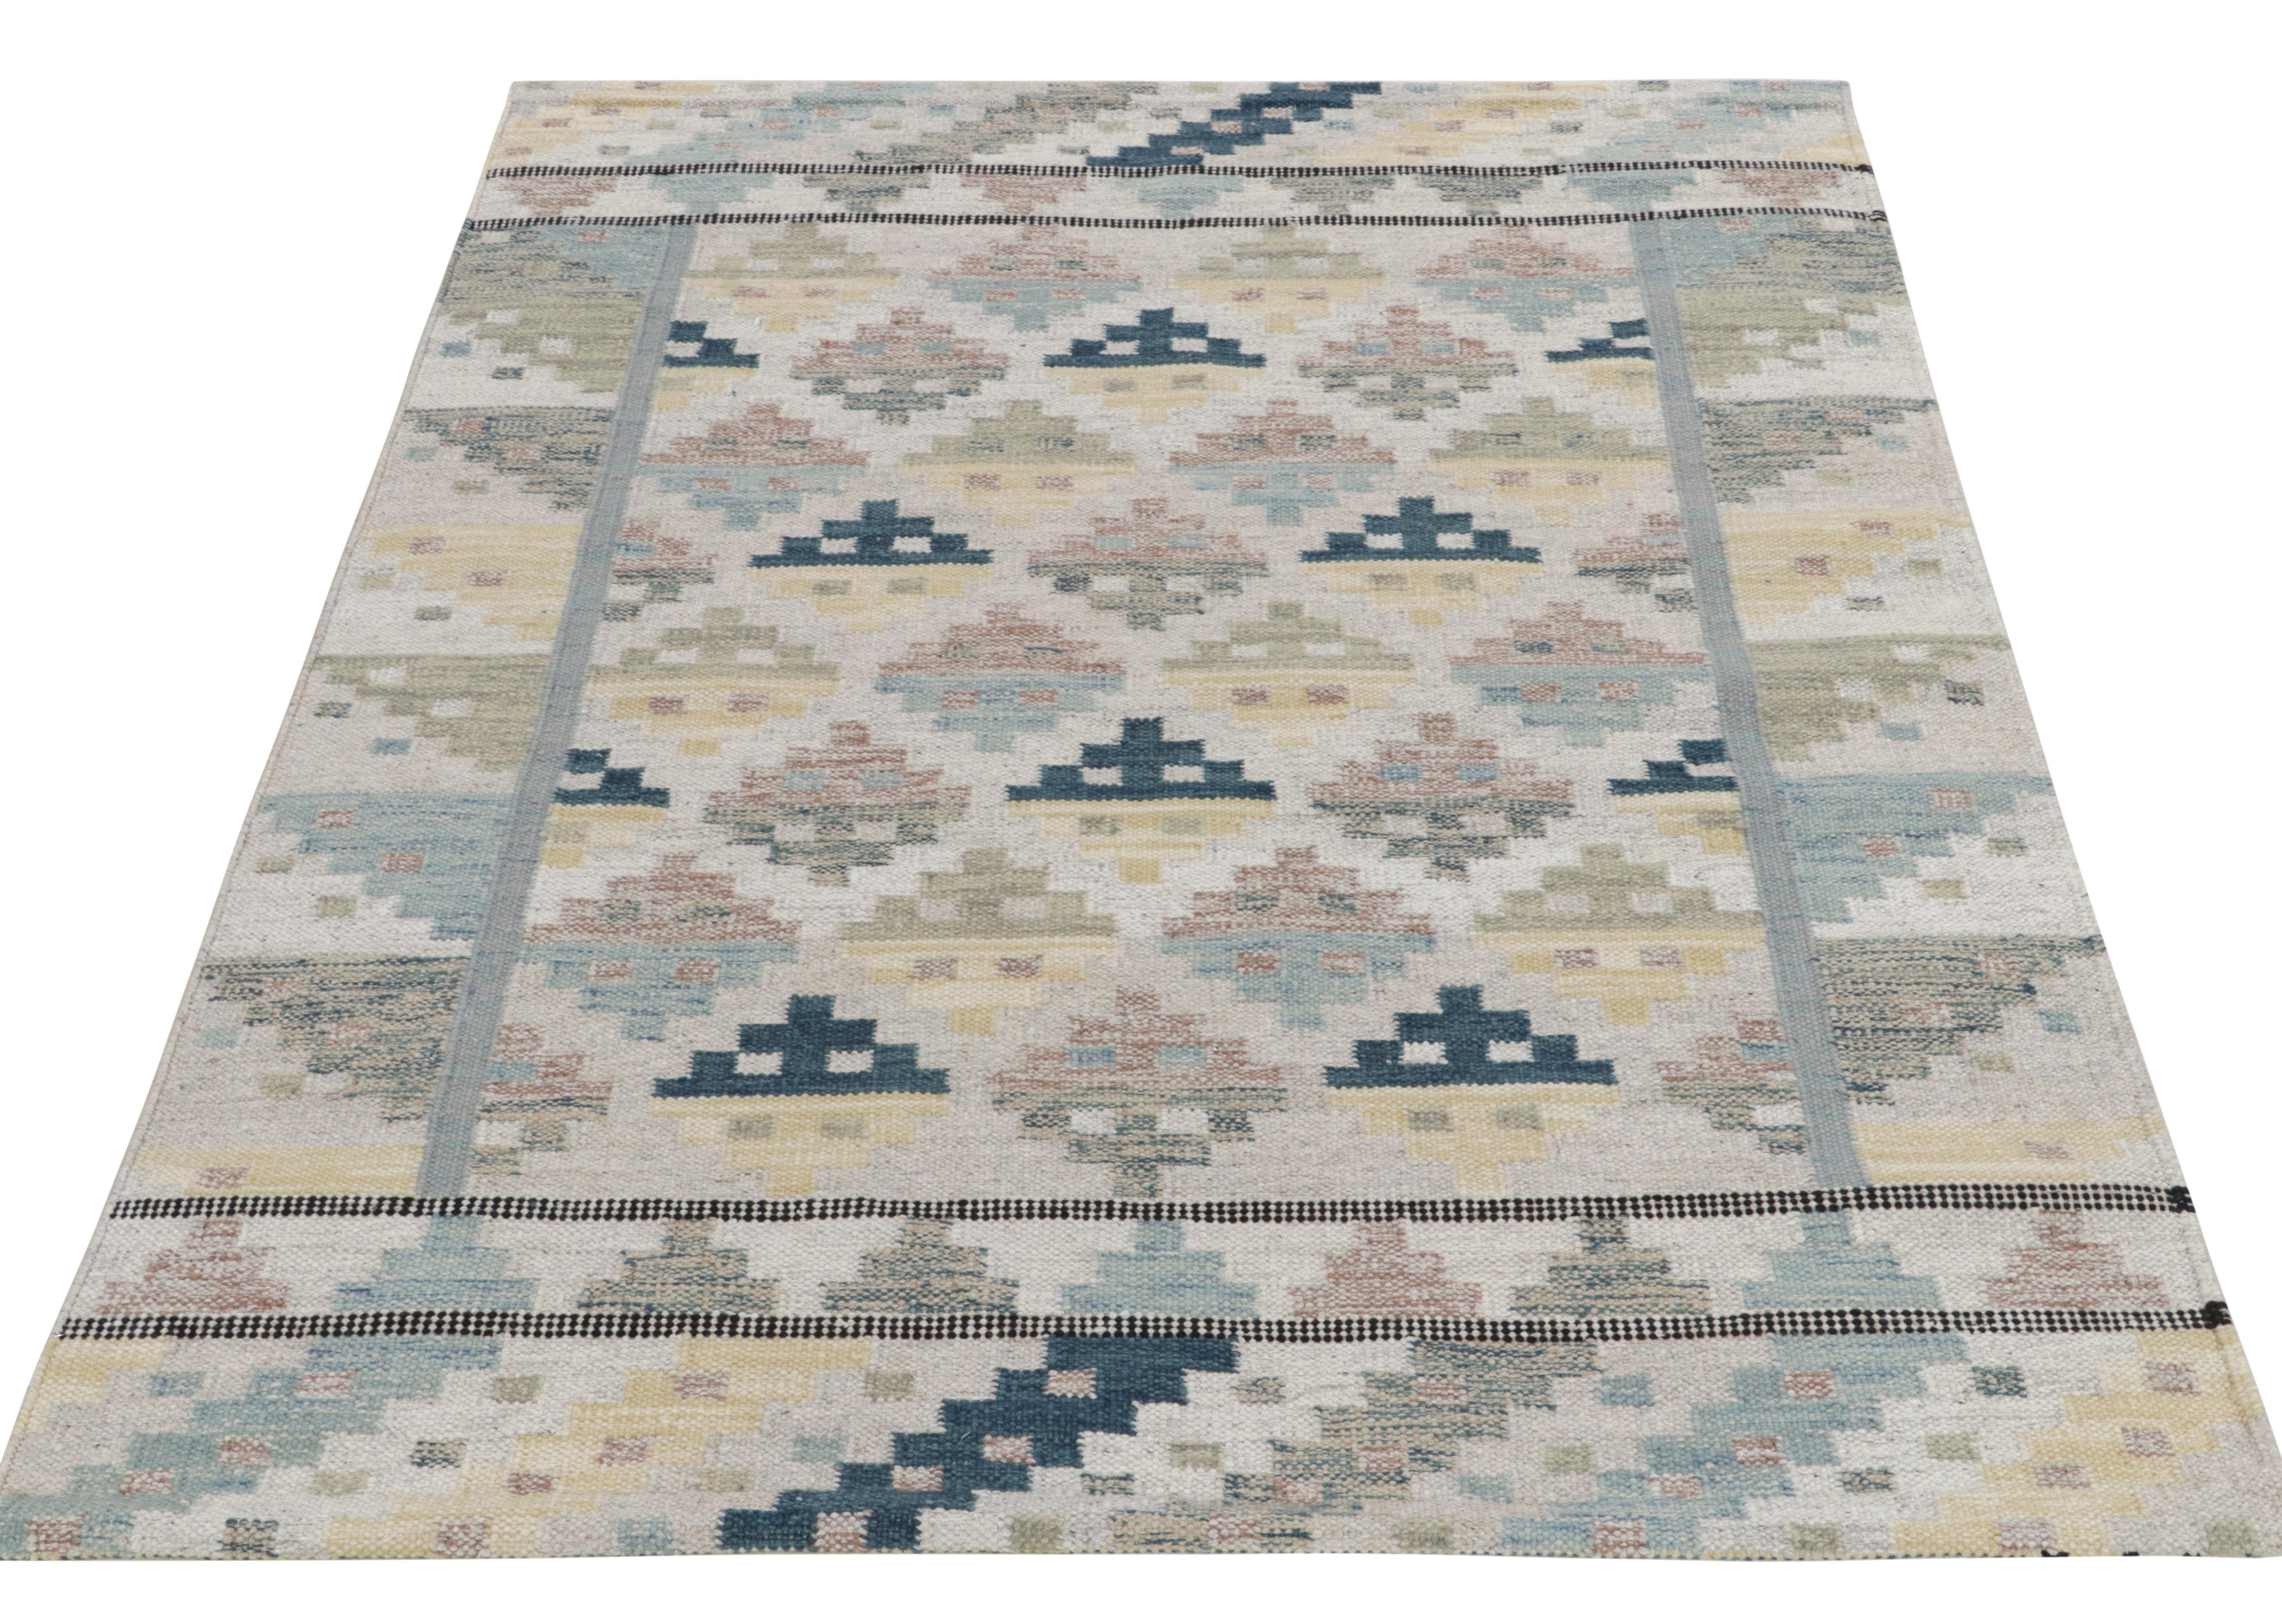 Among the smartest Swedish flatweaves from Rug & Kilim’s Scandinavian collection, this 6x8 handwoven kilim features a well defined geometric pattern in inviting tones of blue, beige, brown, gray and yellow for a calm approach in mid century